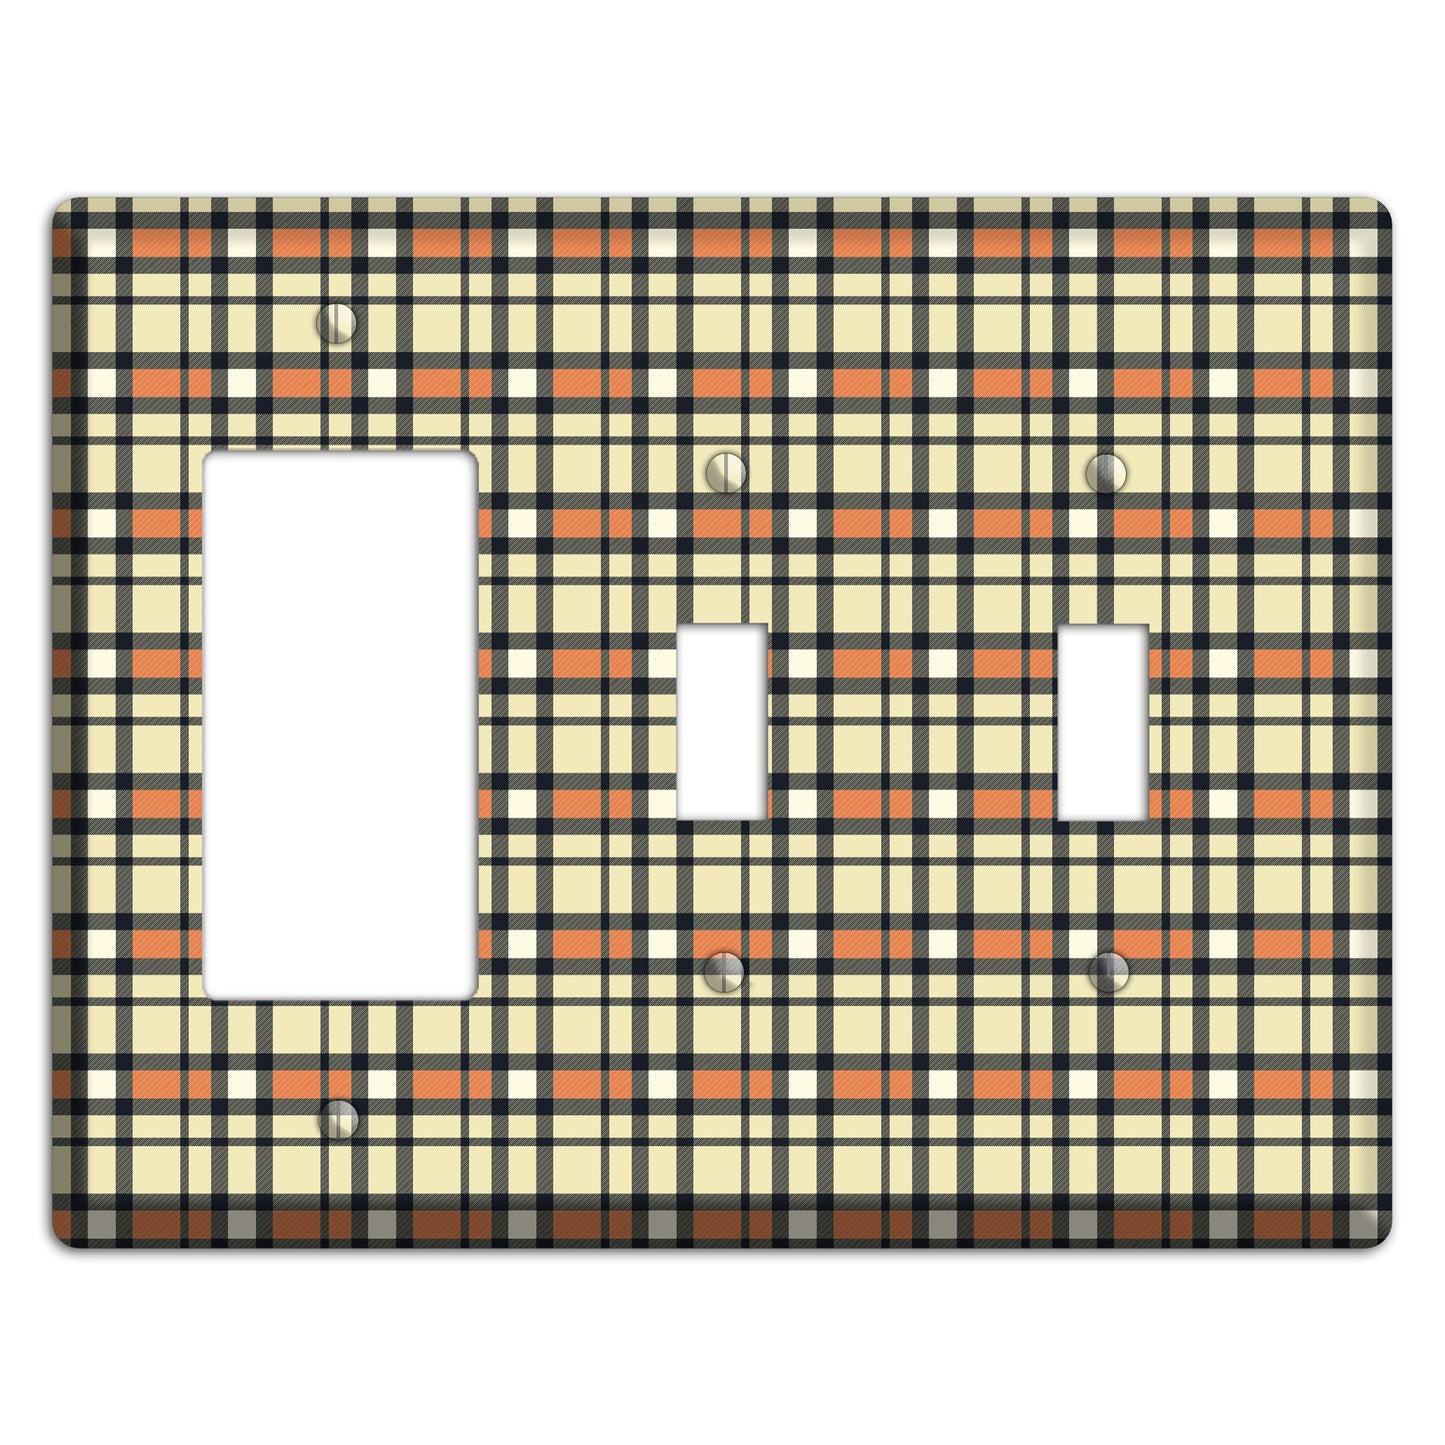 Beige and Brown Plaid Rocker / 2 Toggle Wallplate